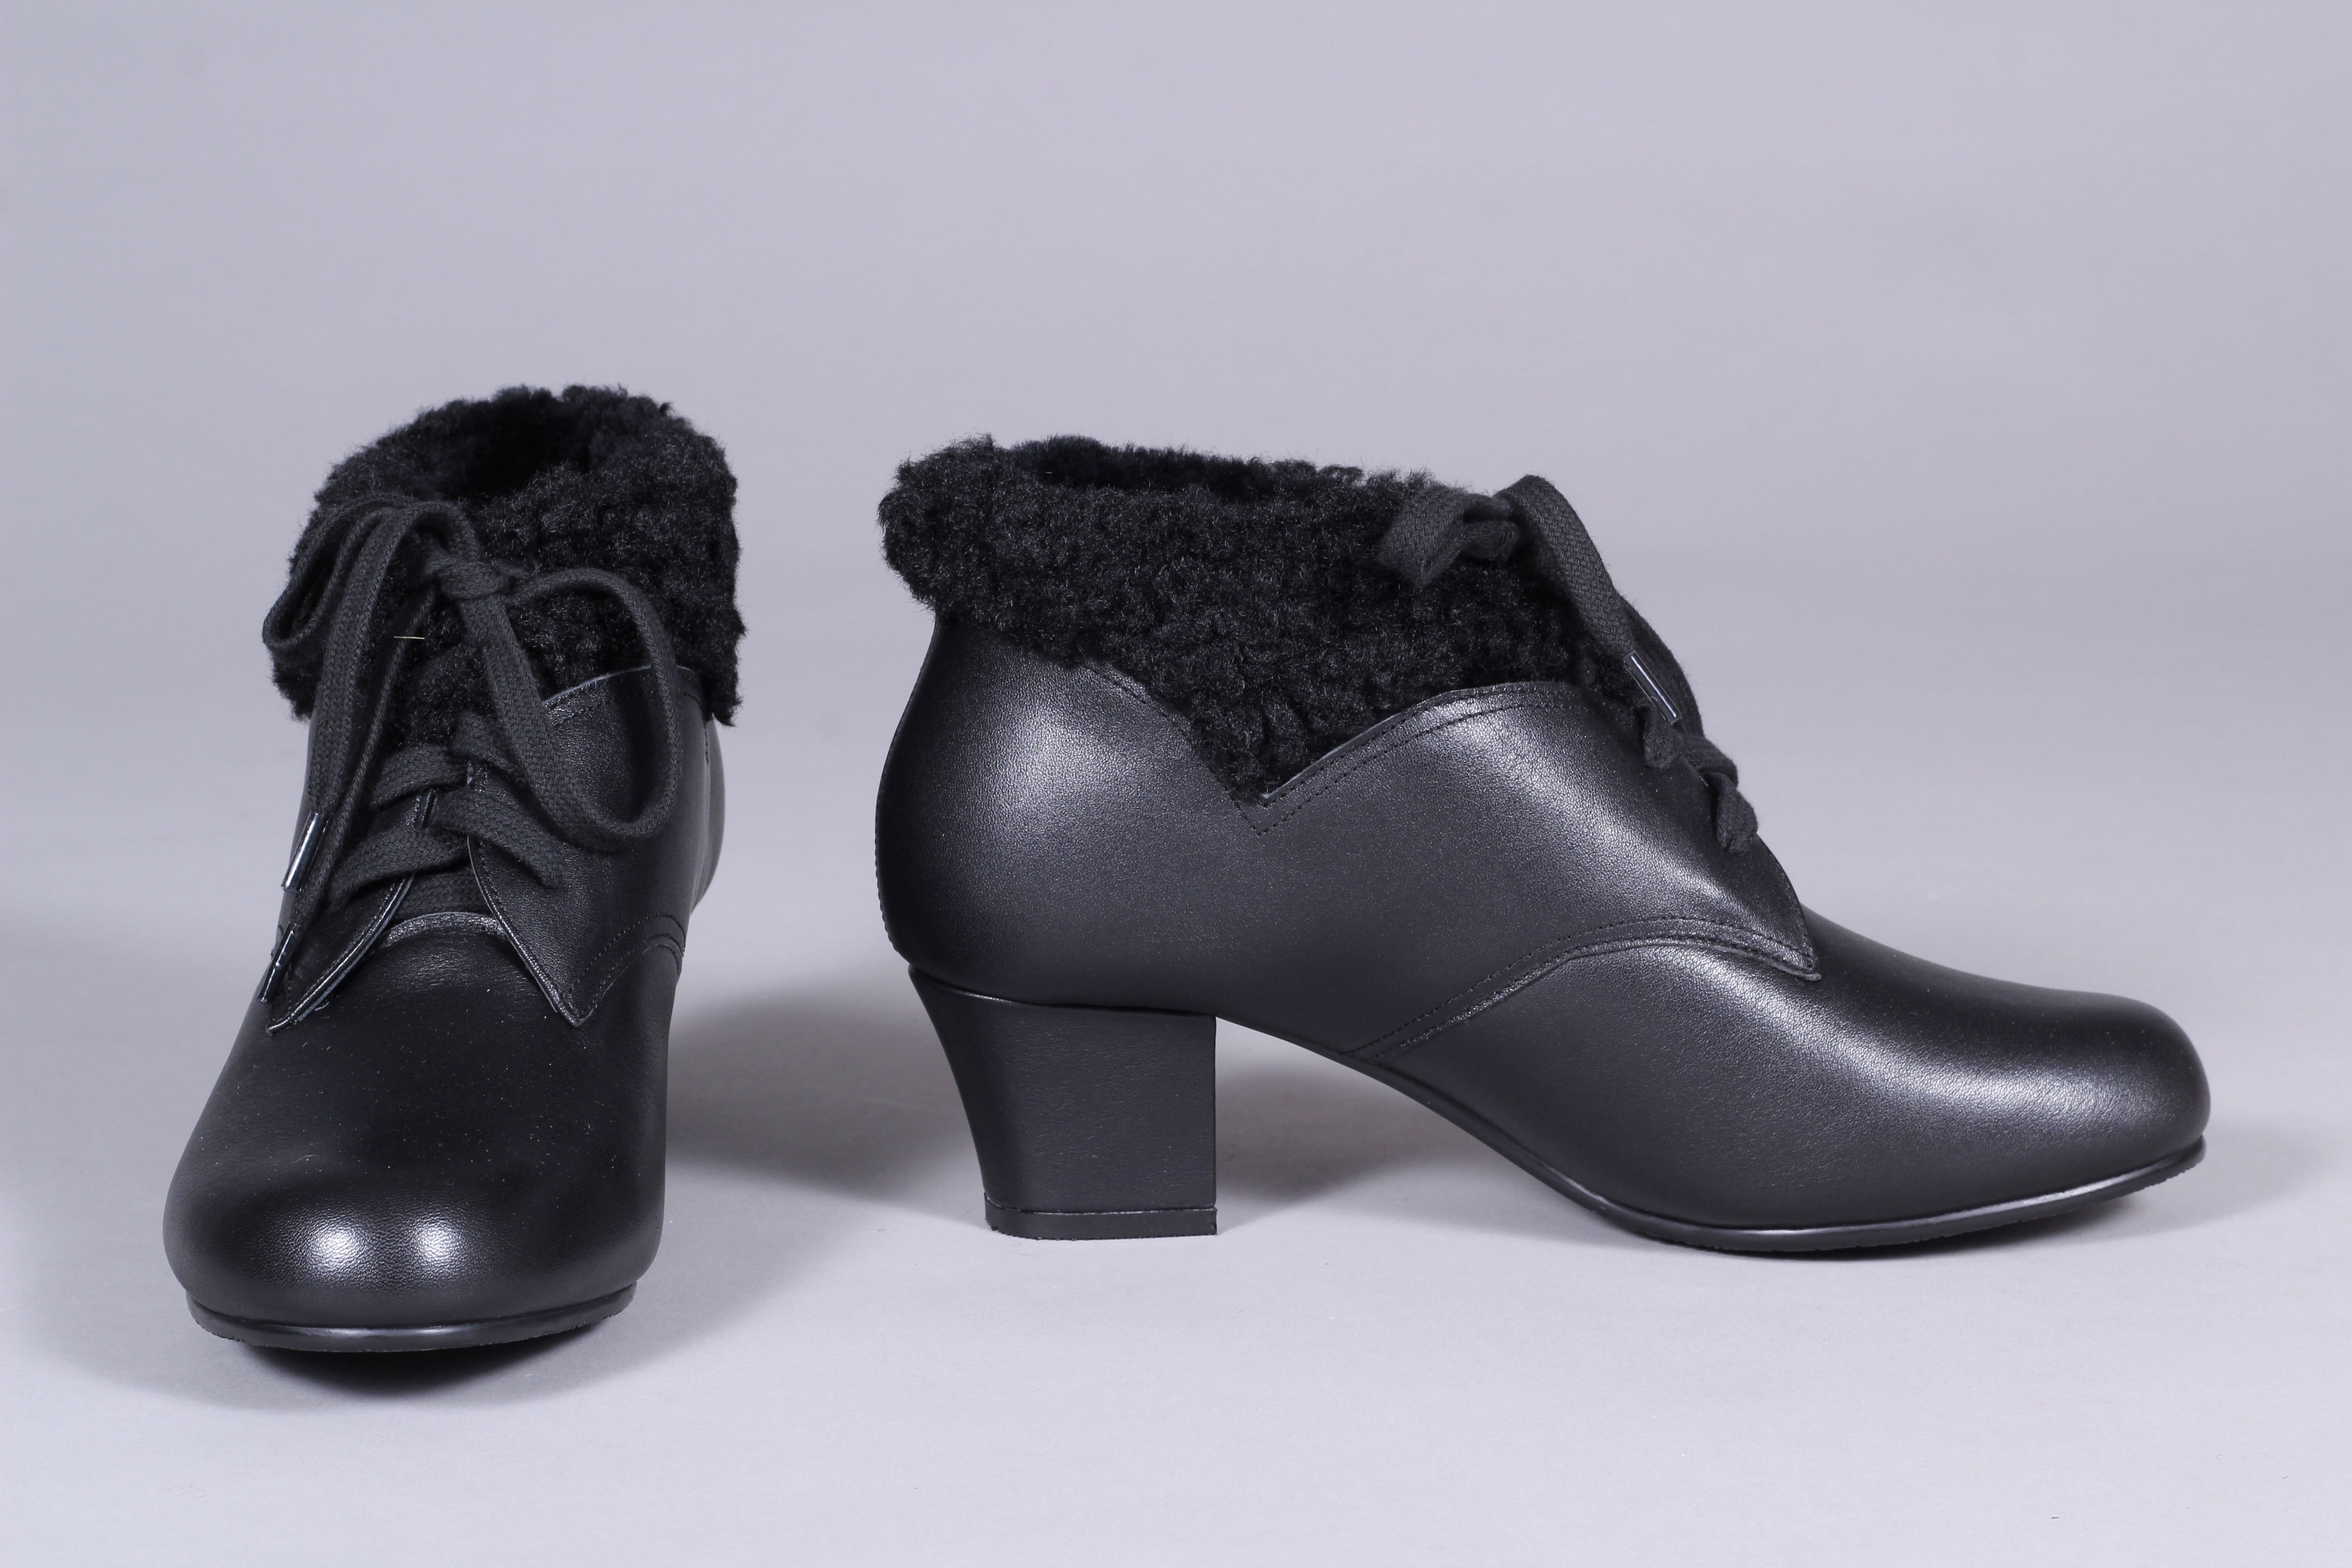 Soft 1940s /1950s style booties with fur - Black - Karin – memery